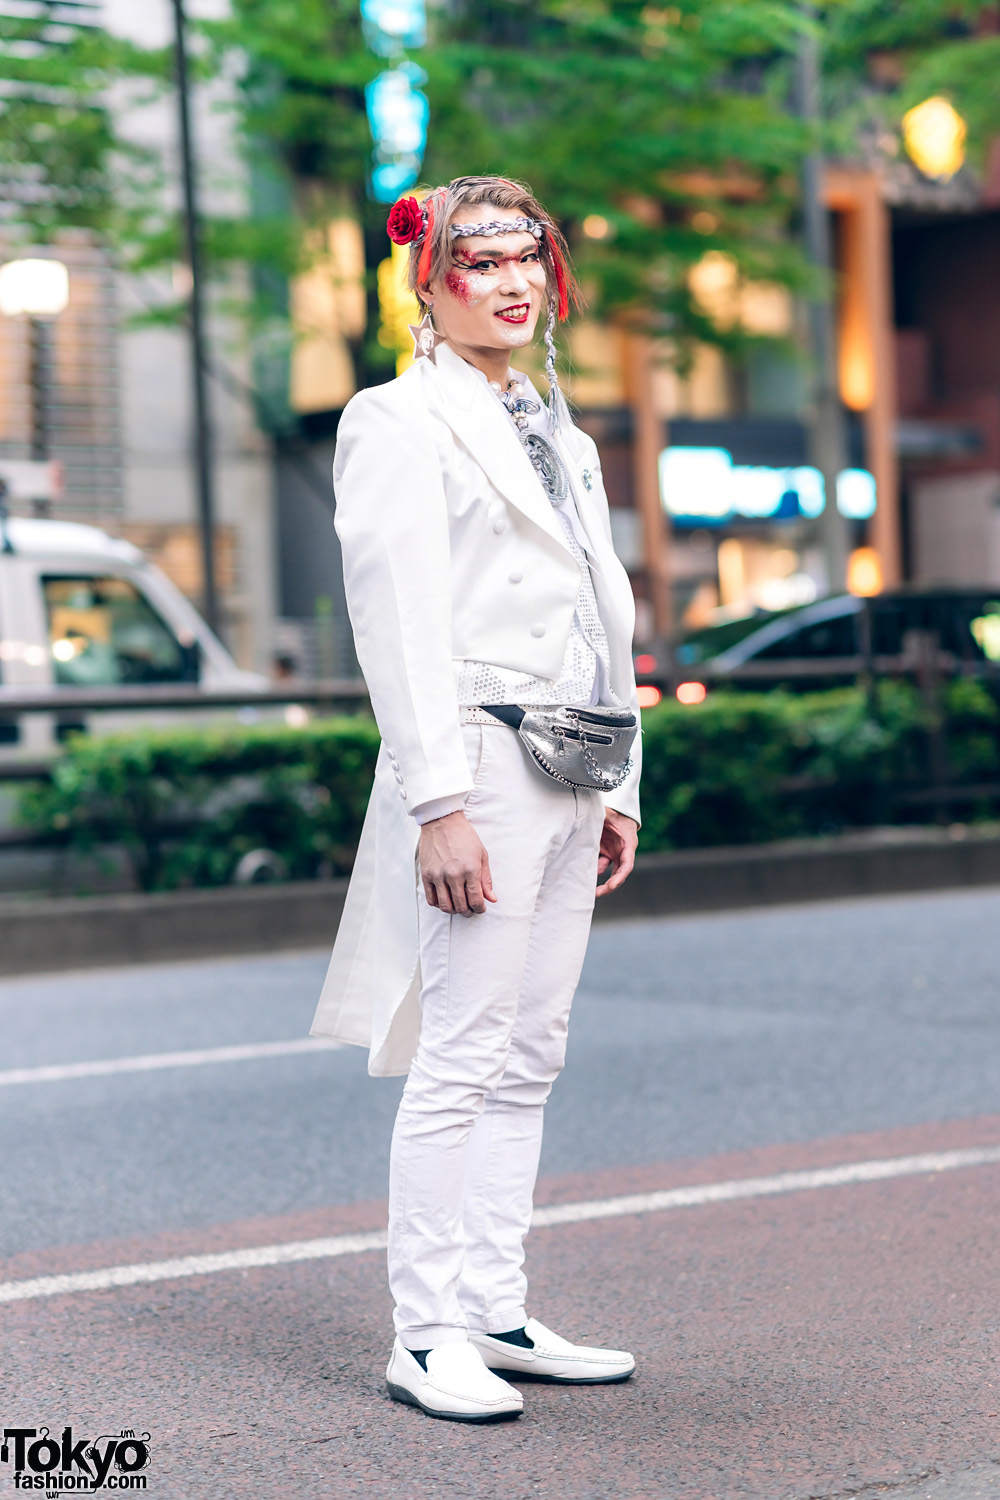 Shibuya Fashion Walk Organizer's Streetwear Style w/ Red Feathers, Glitter Makeup, Tailcoat Tuxedo, Sequin Vest, Medallion Necklace & Loafers